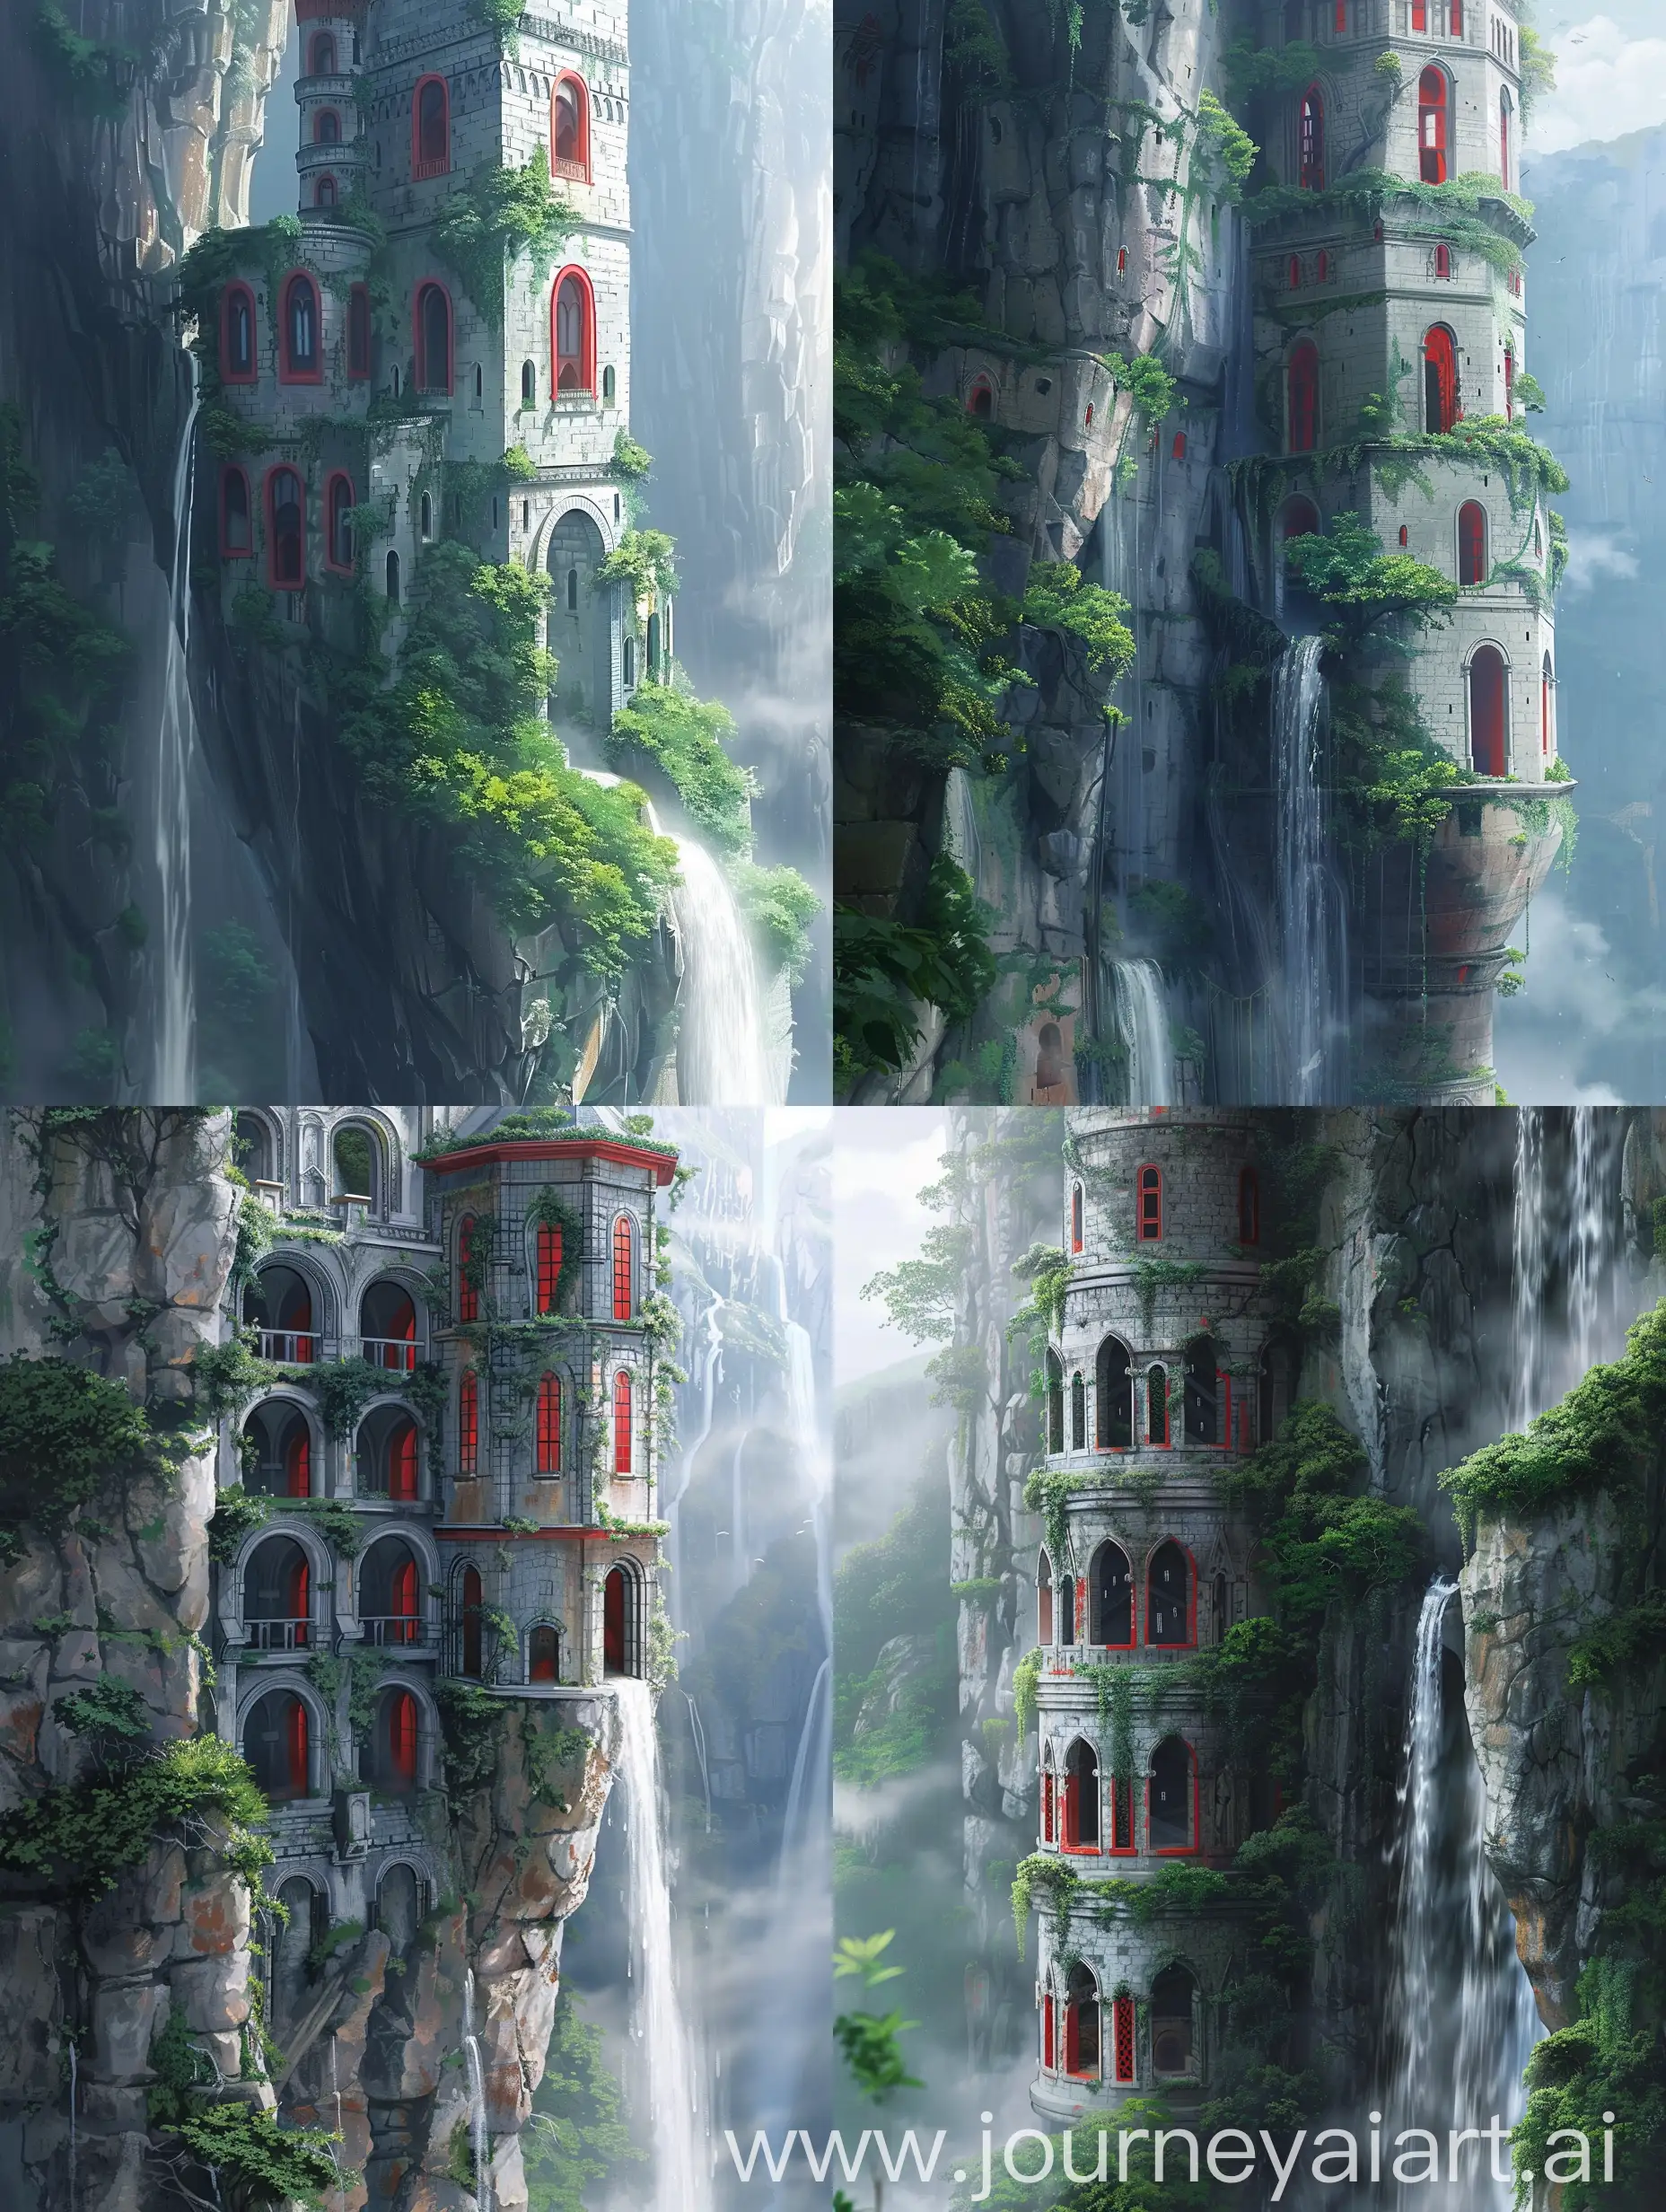 Ghibli-Anime-Style-Tower-on-Cliff-with-Waterfall-and-Lush-Greenery